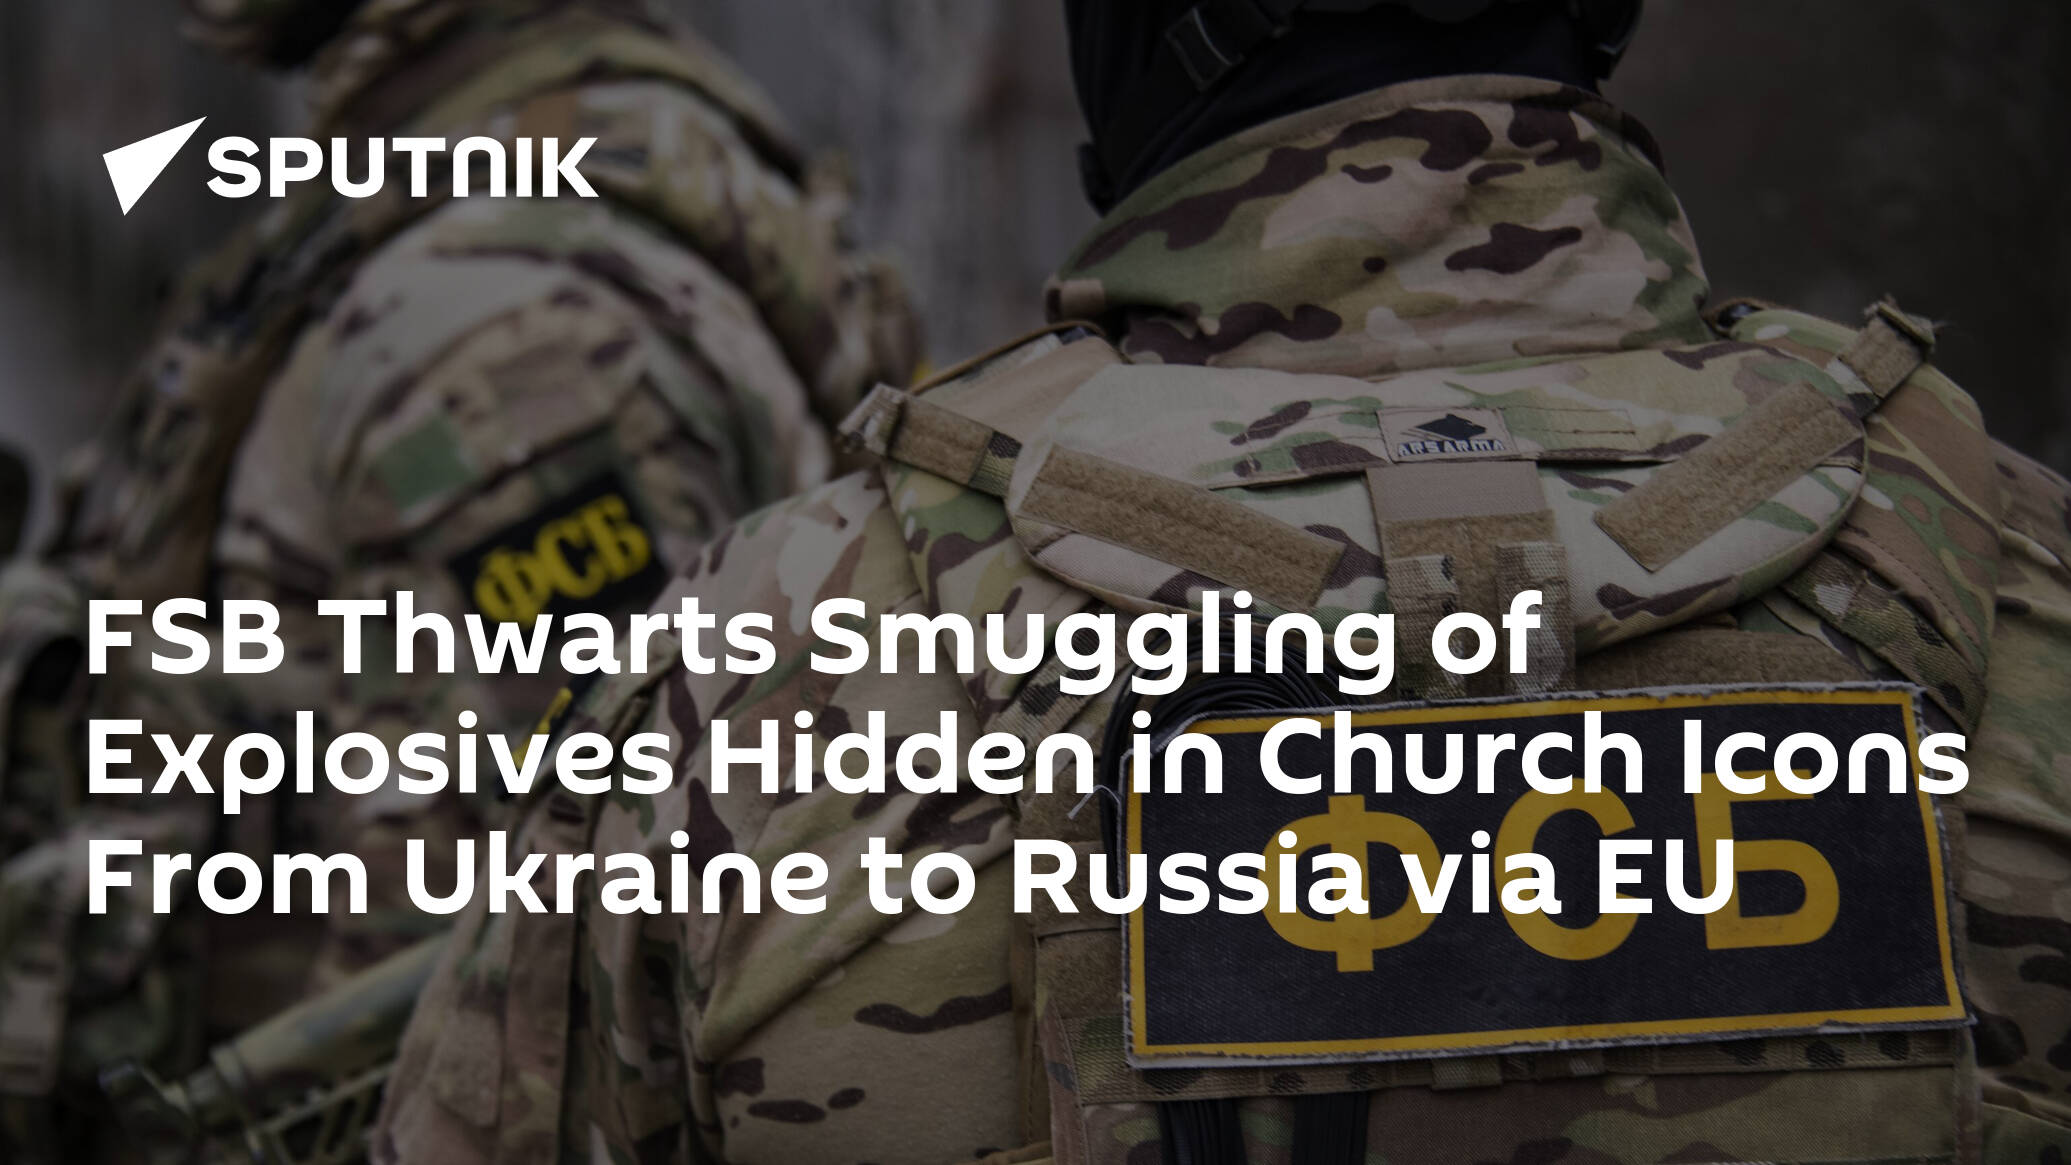 FSB Foils Smuggling of Explosives Hidden in Church Icons From Ukraine to Russia via EU